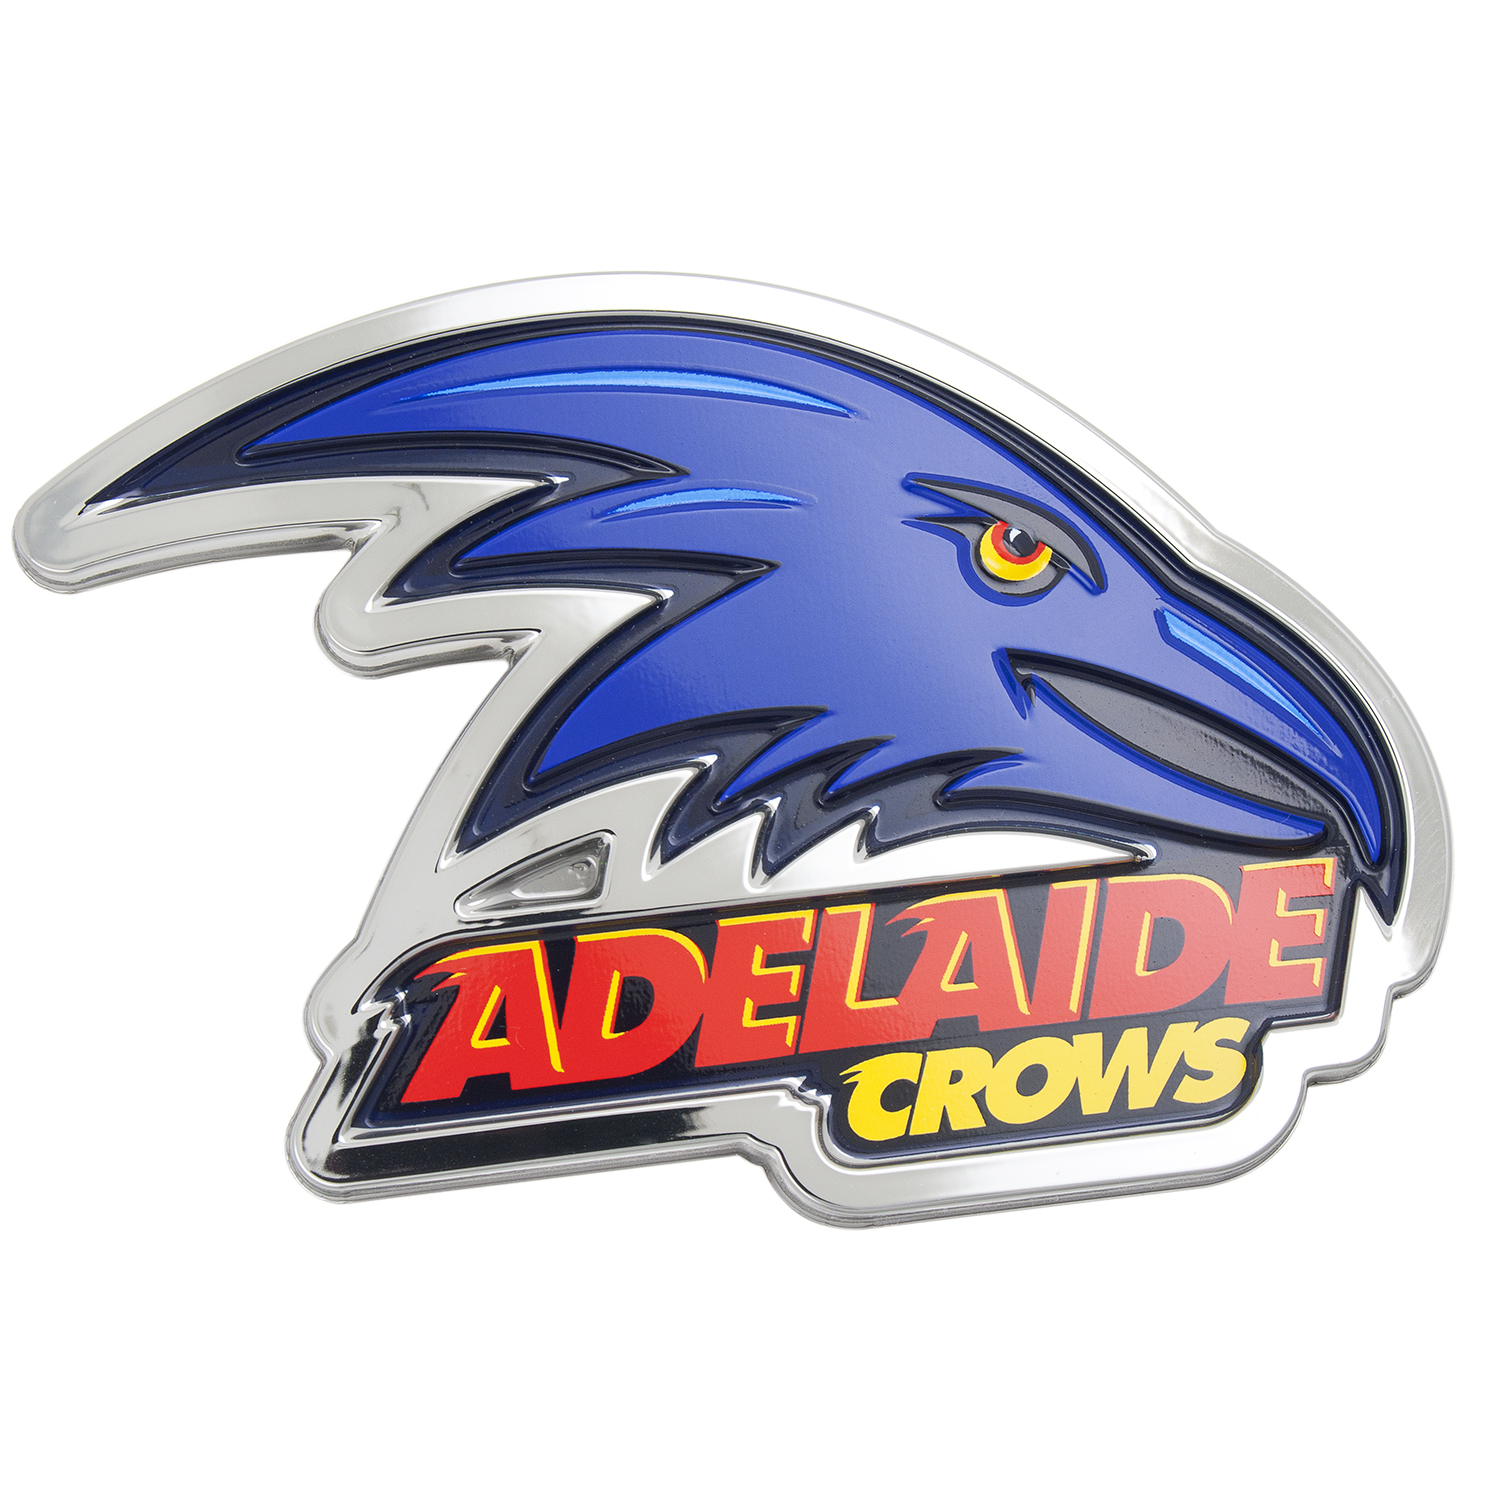 New Adelaide Crows Logo - Adelaide Crows 90 S Shield Logo Redesign By